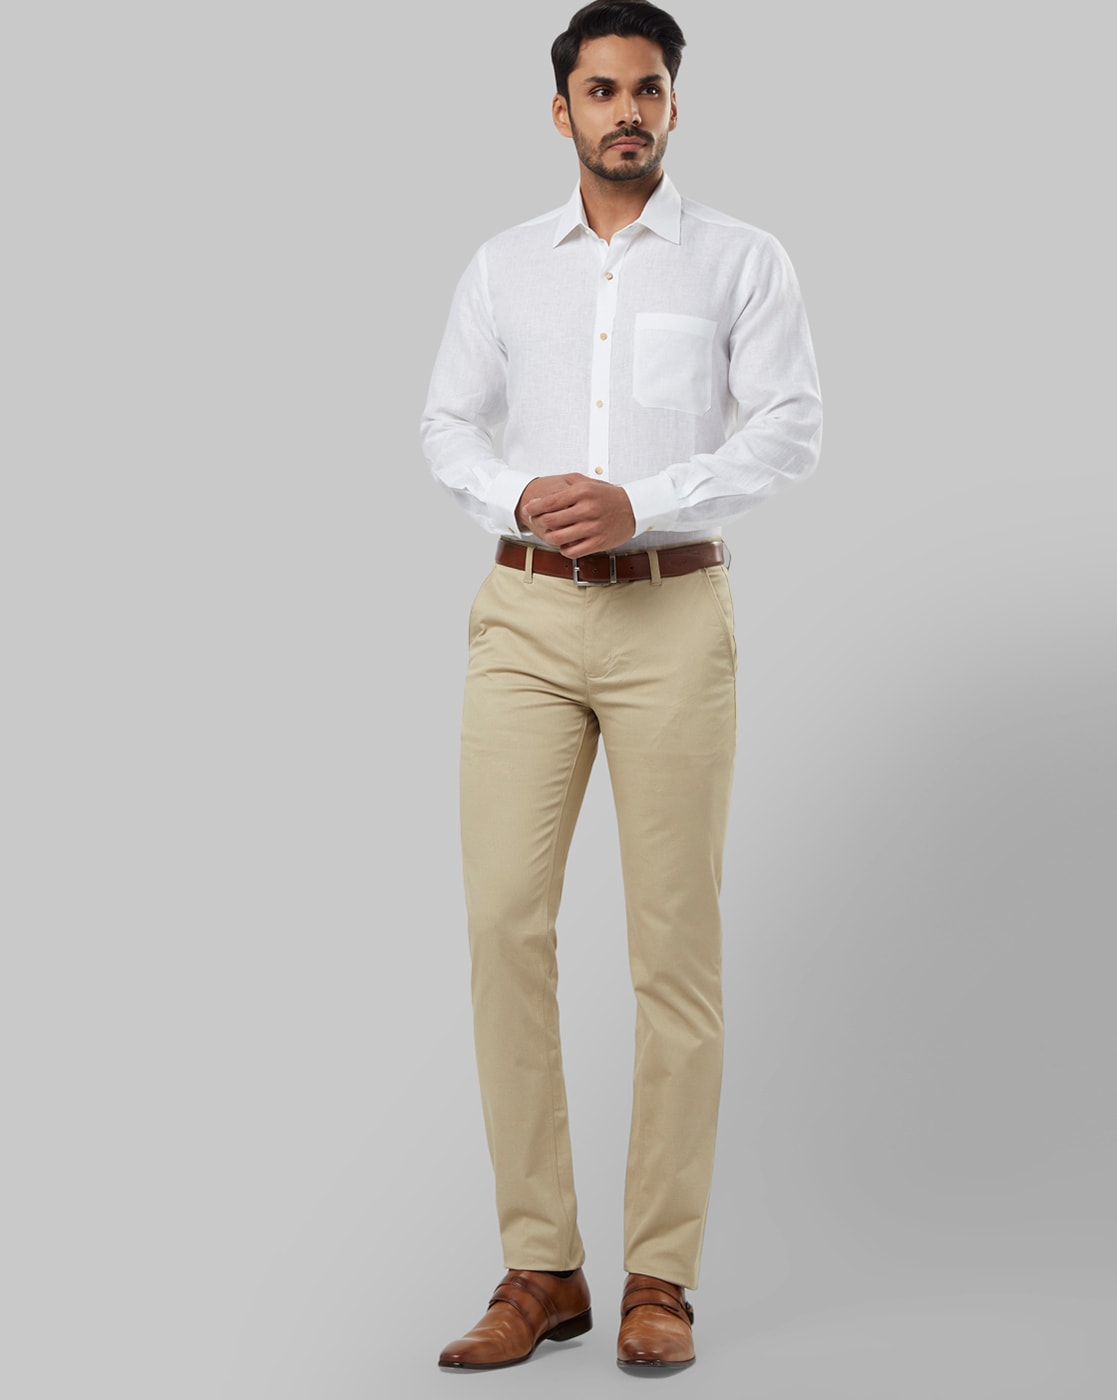 Smart casual outfit for special men beige pants brown shoes  belt white  shirt white pants blubla  Smart casual outfit White shirt men Mens  fashion casual